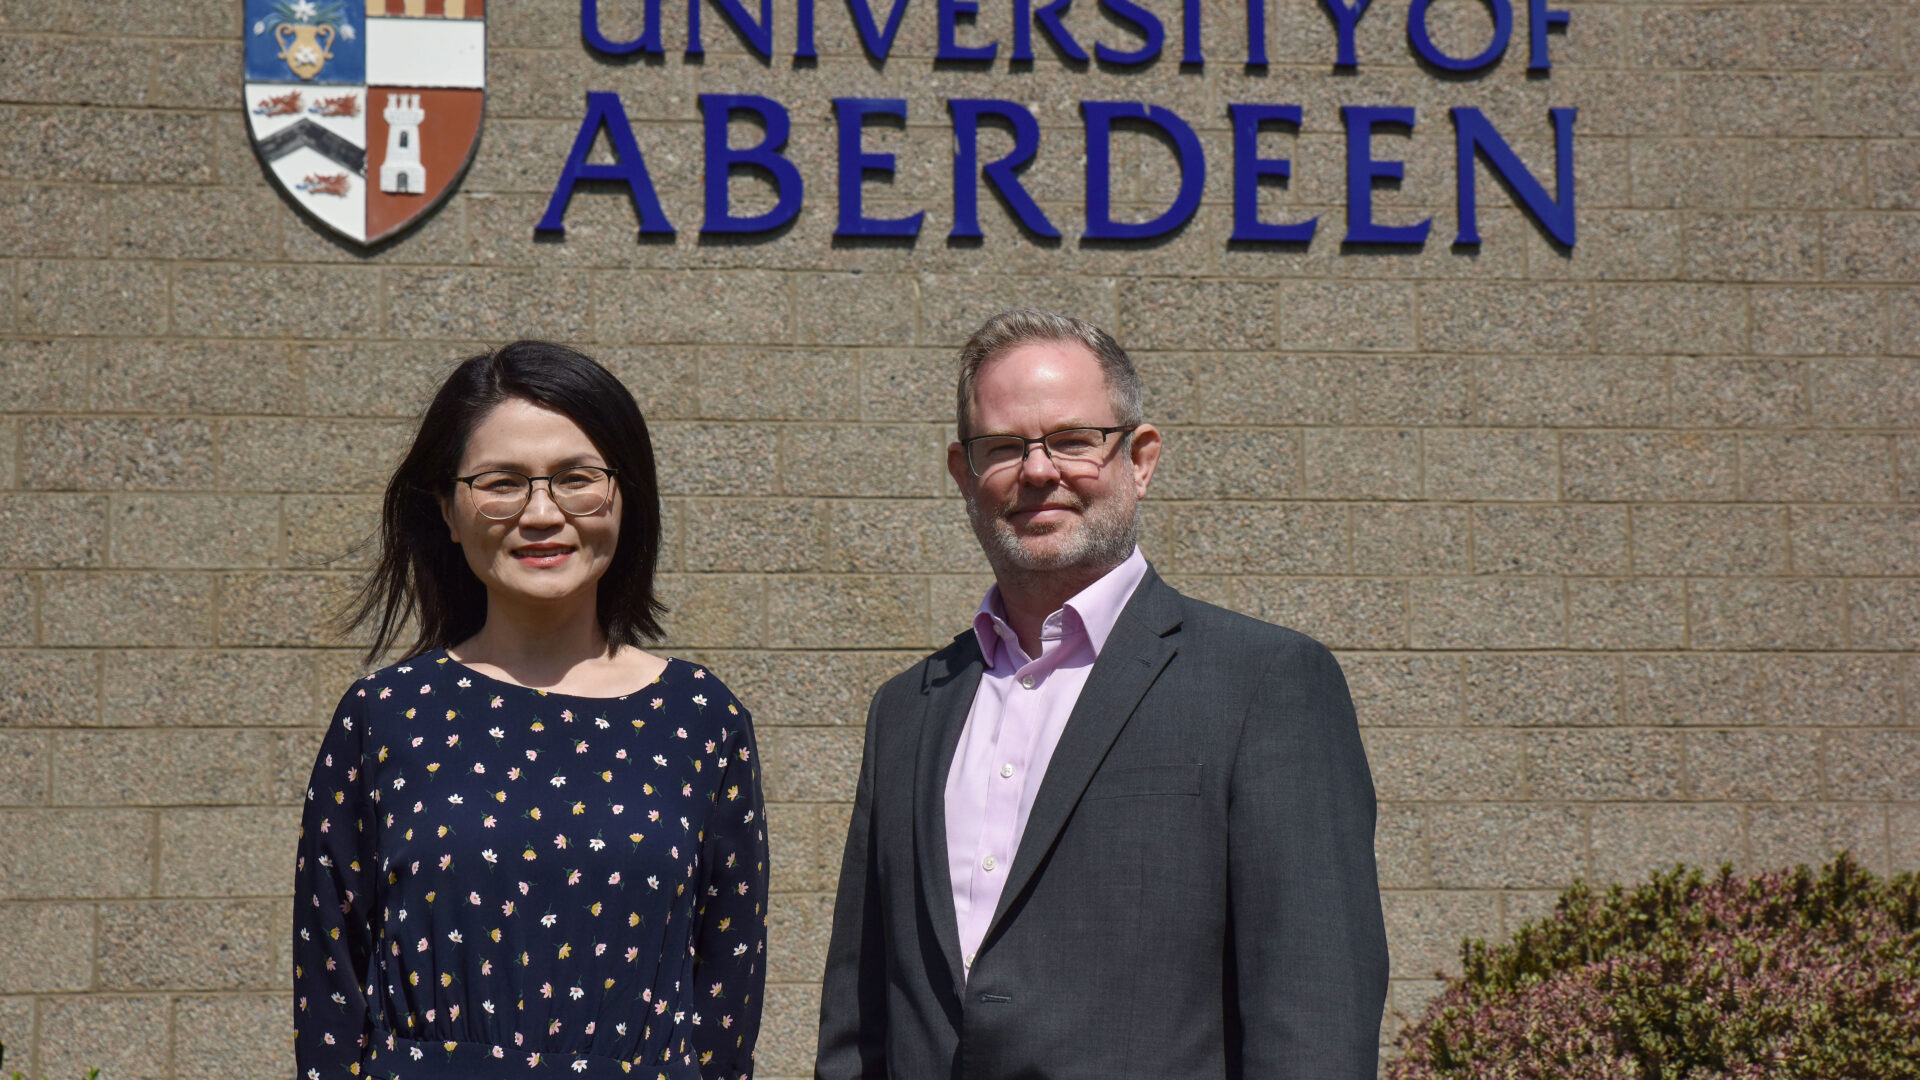 Shepherd sponsors prizes for students on University of Aberdeen Business School Real Estate course